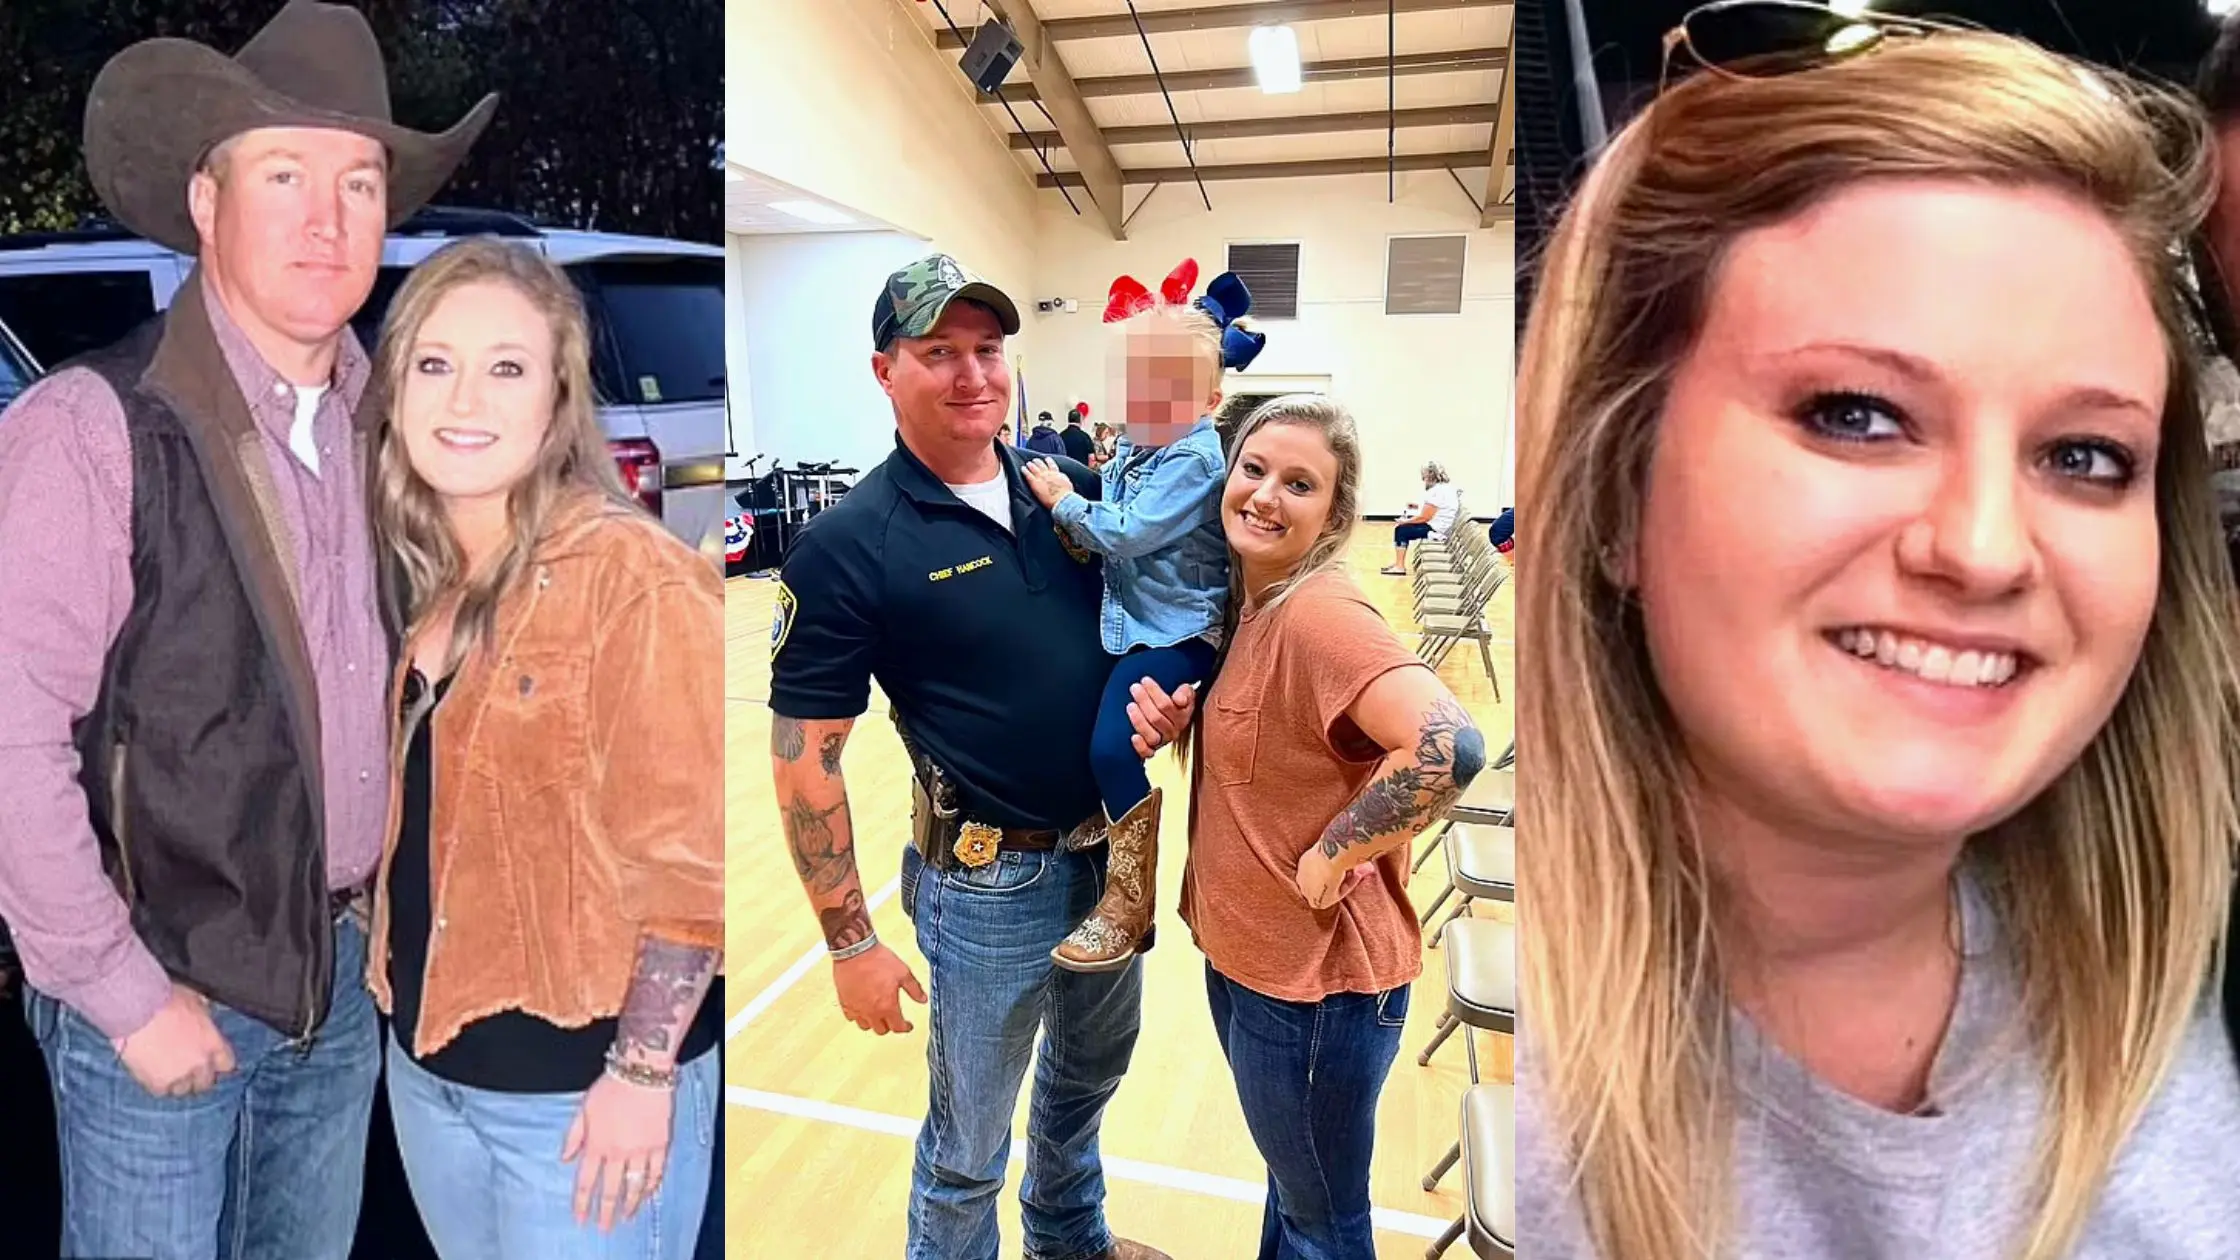 Oklahoma Teacher, Wife Of Police Chief Arrested For Sexually Abusing Teen